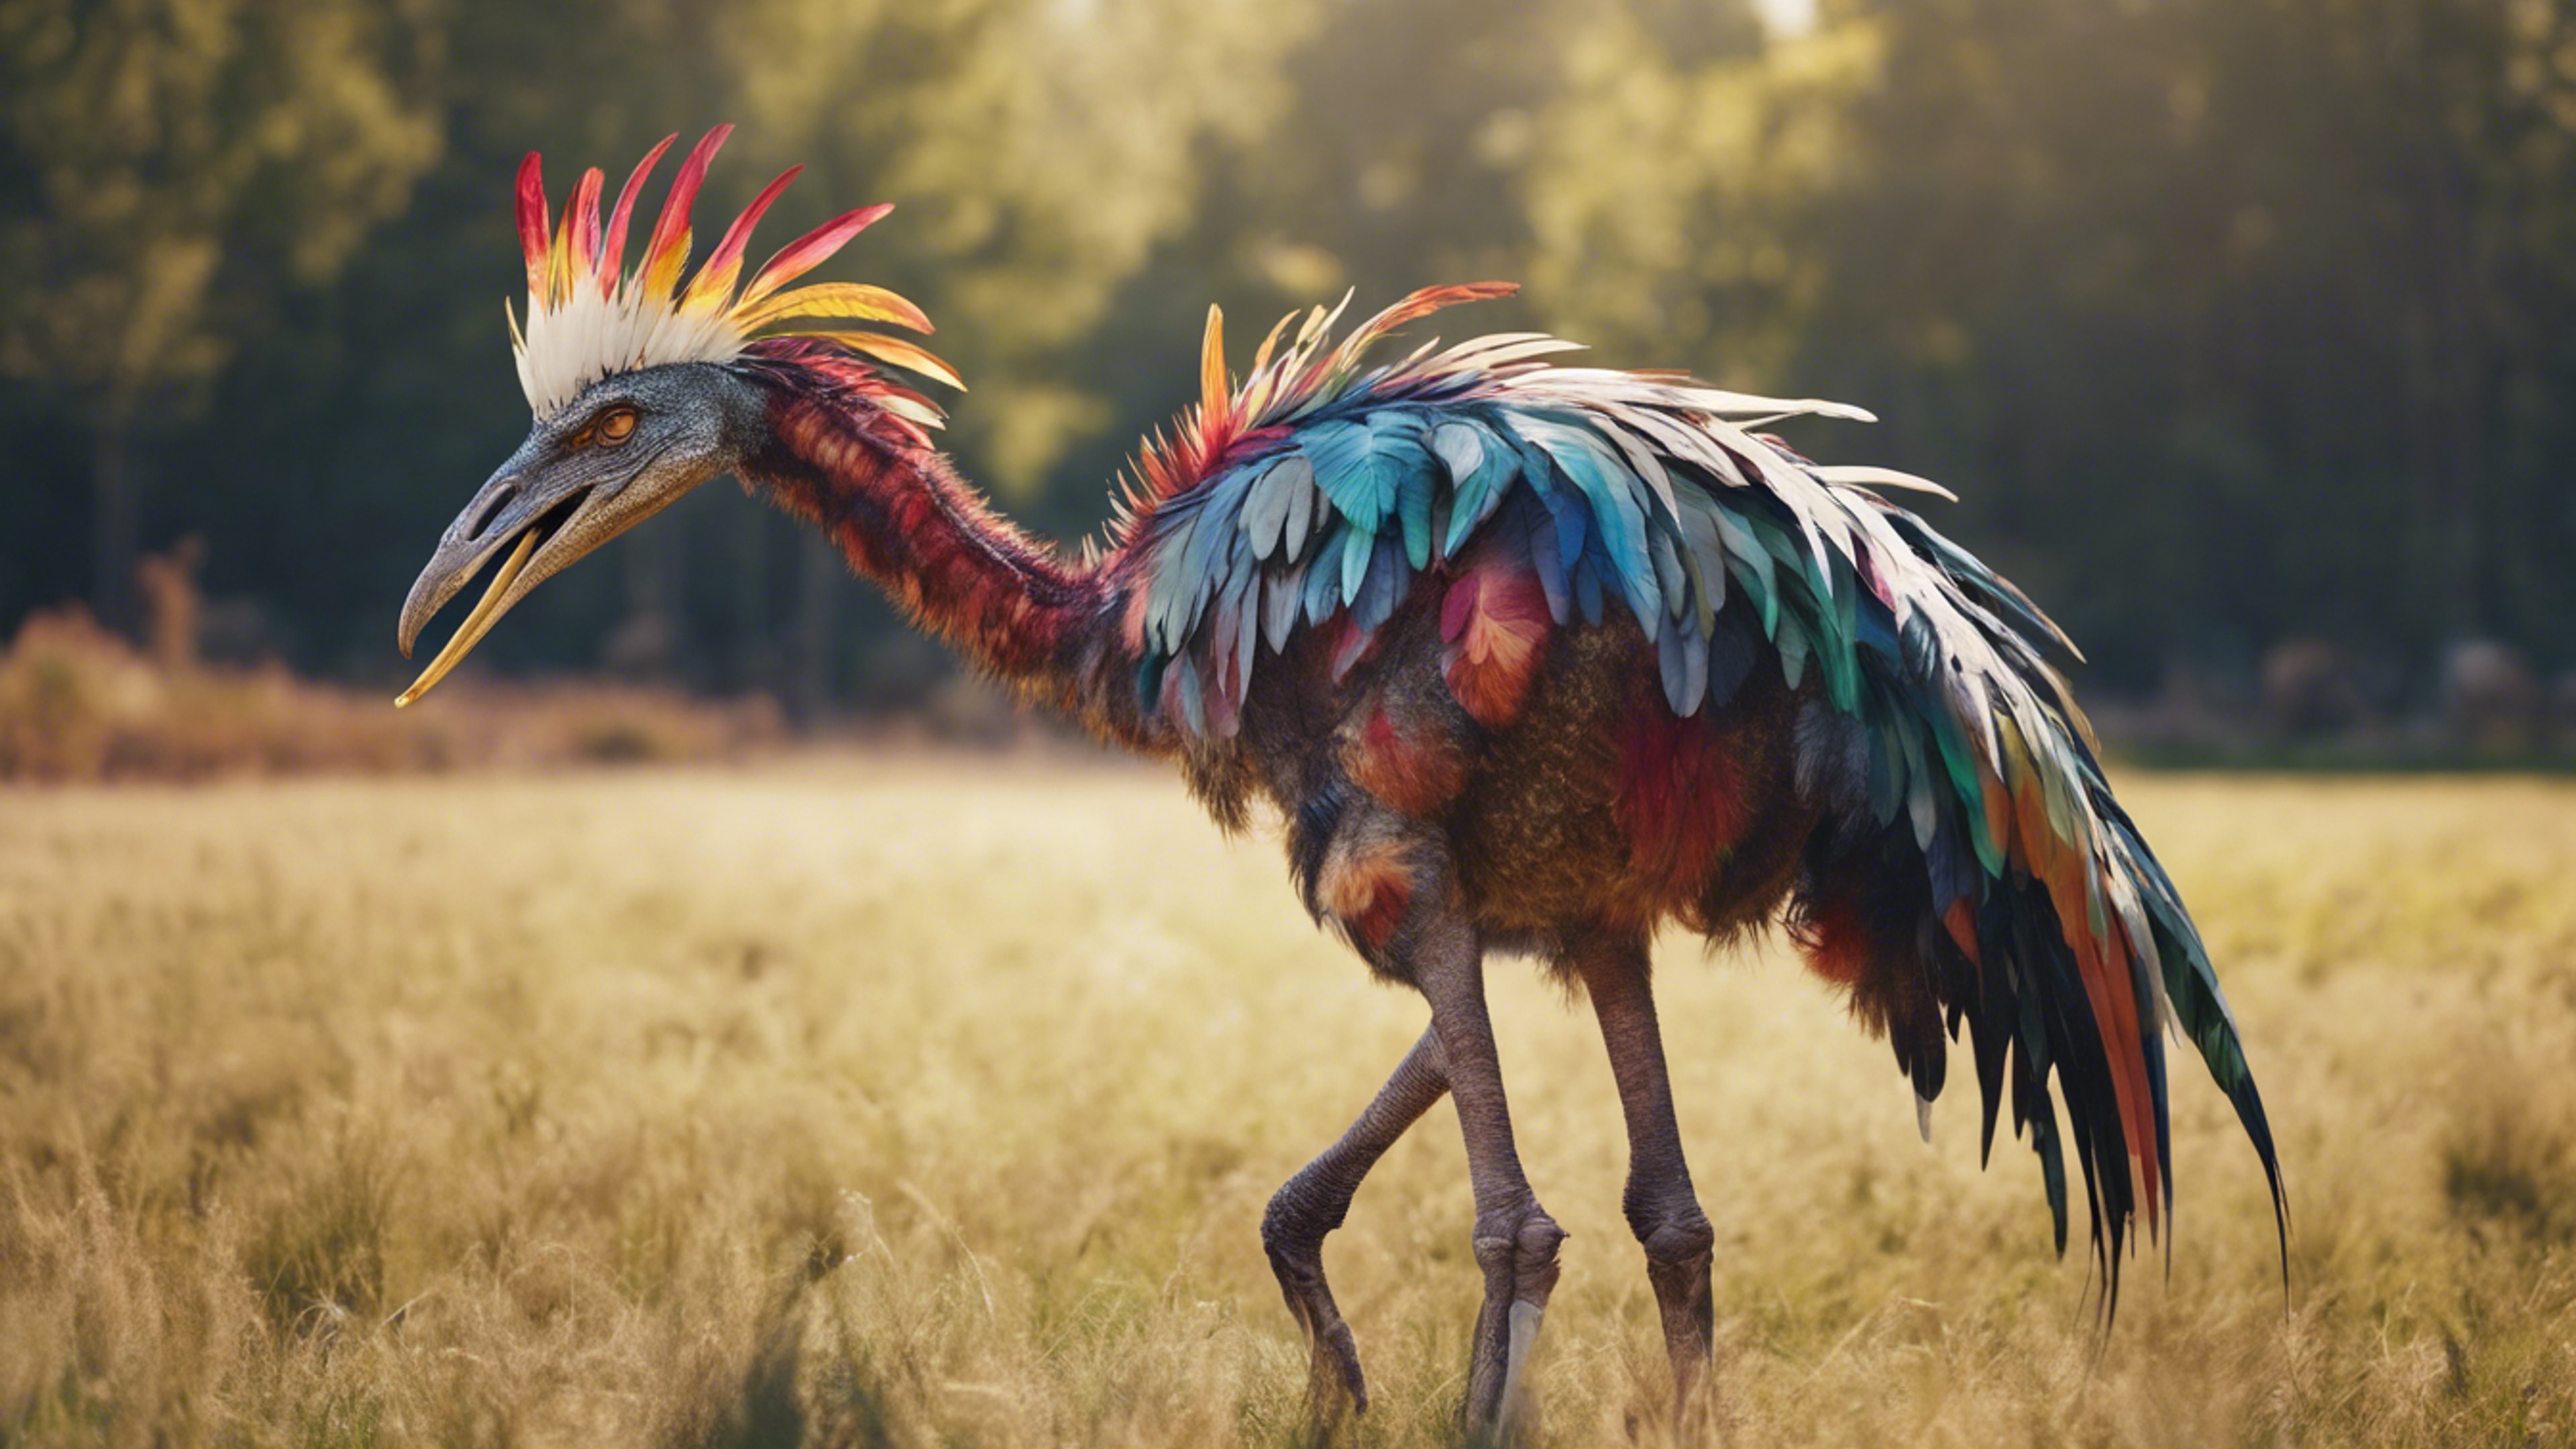 A Struthiomimus with colorful feathers prancing around in an open meadow. 墙纸[bbeb240df8e5485aba58]